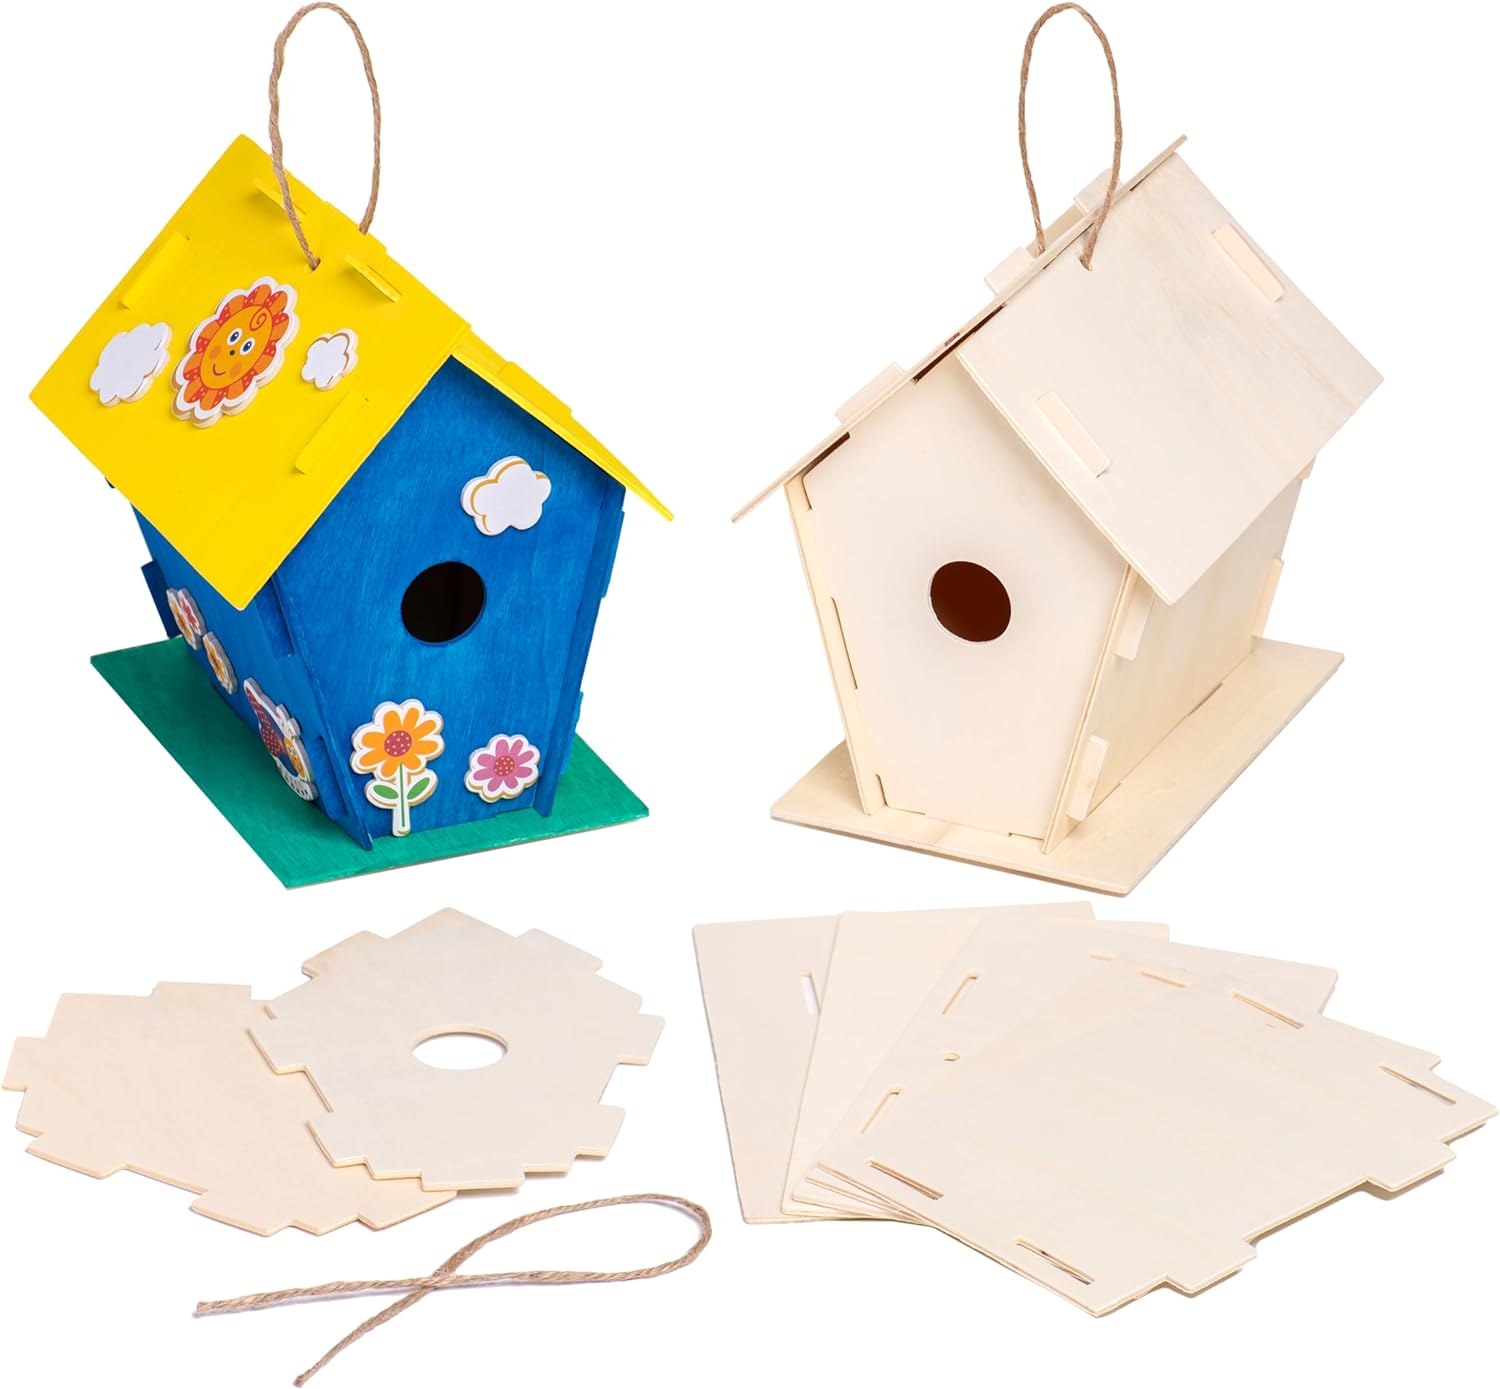 Neliblu 12 DIY Wooden Birdhouses – A Fun and Educational Craft Set for Kids and Adults